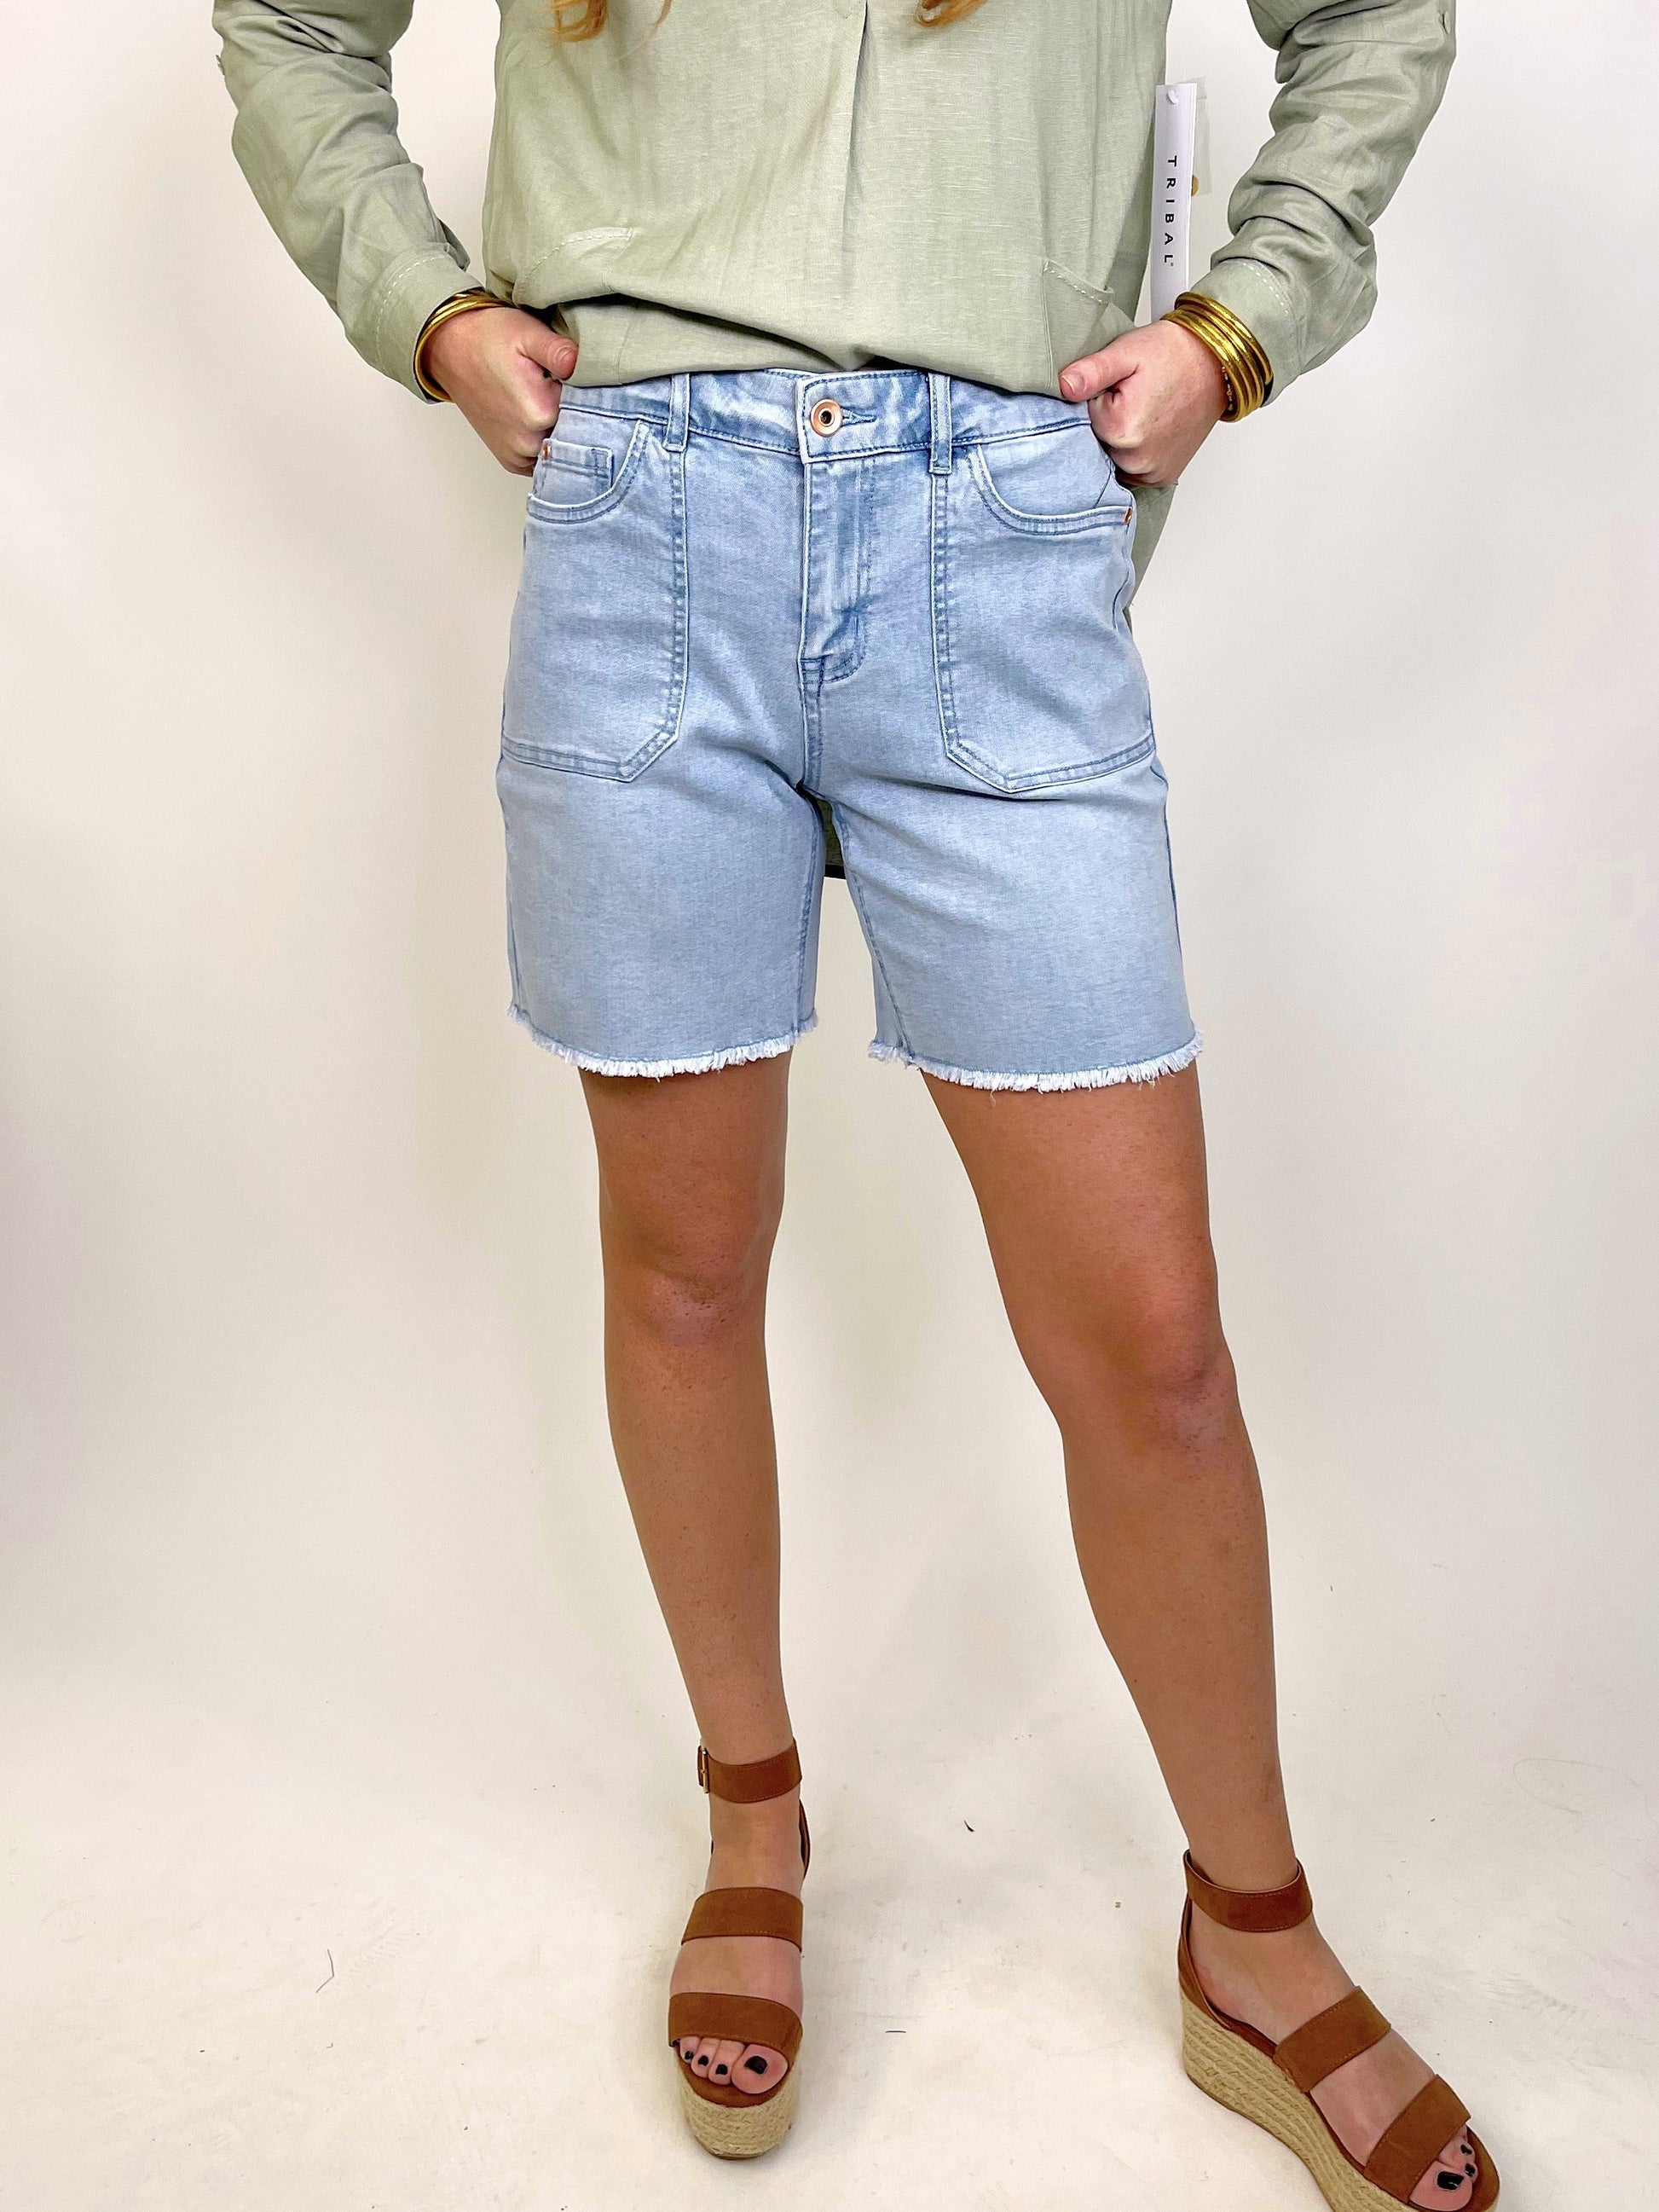 The Stacy Shorts | Tribal-Shorts-Tribal-The Village Shoppe, Women’s Fashion Boutique, Shop Online and In Store - Located in Muscle Shoals, AL.